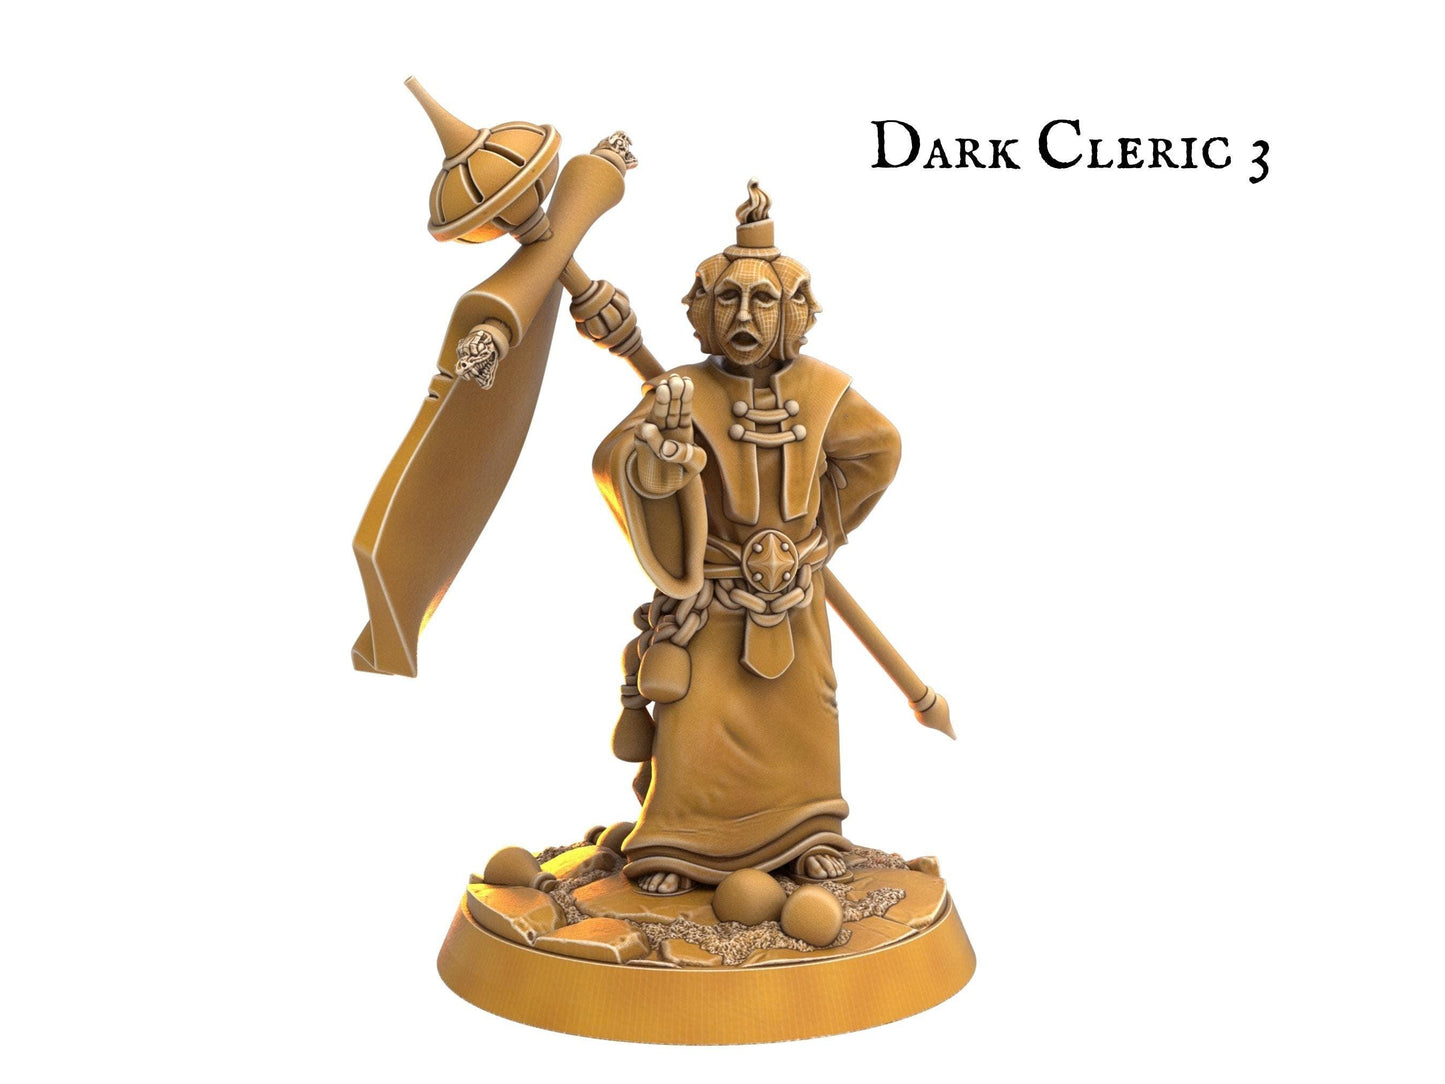 Male Dark DnD Cleric Miniature witch miniature - 5 Poses - 32mm scale Tabletop gaming DnD Miniature Dungeons and Dragons dnd 5e - Plague Miniatures shop for DnD Miniatures